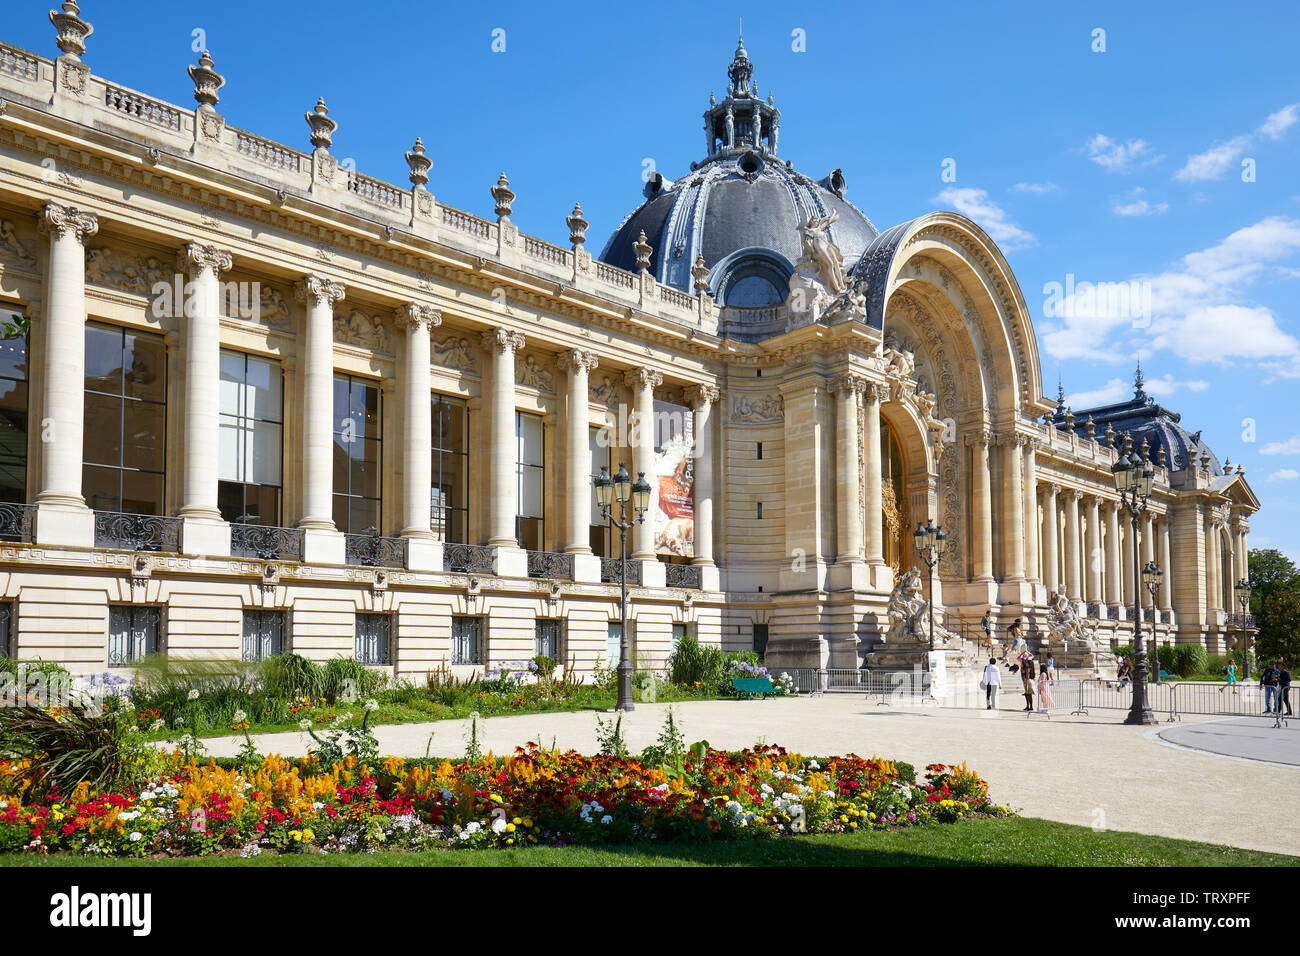 PARIS, FRANCE - JULY 21, 2017: Petit Palais building and colorful flowerbed in a sunny summer day, clear blue sky in Paris, France. Stock Photo